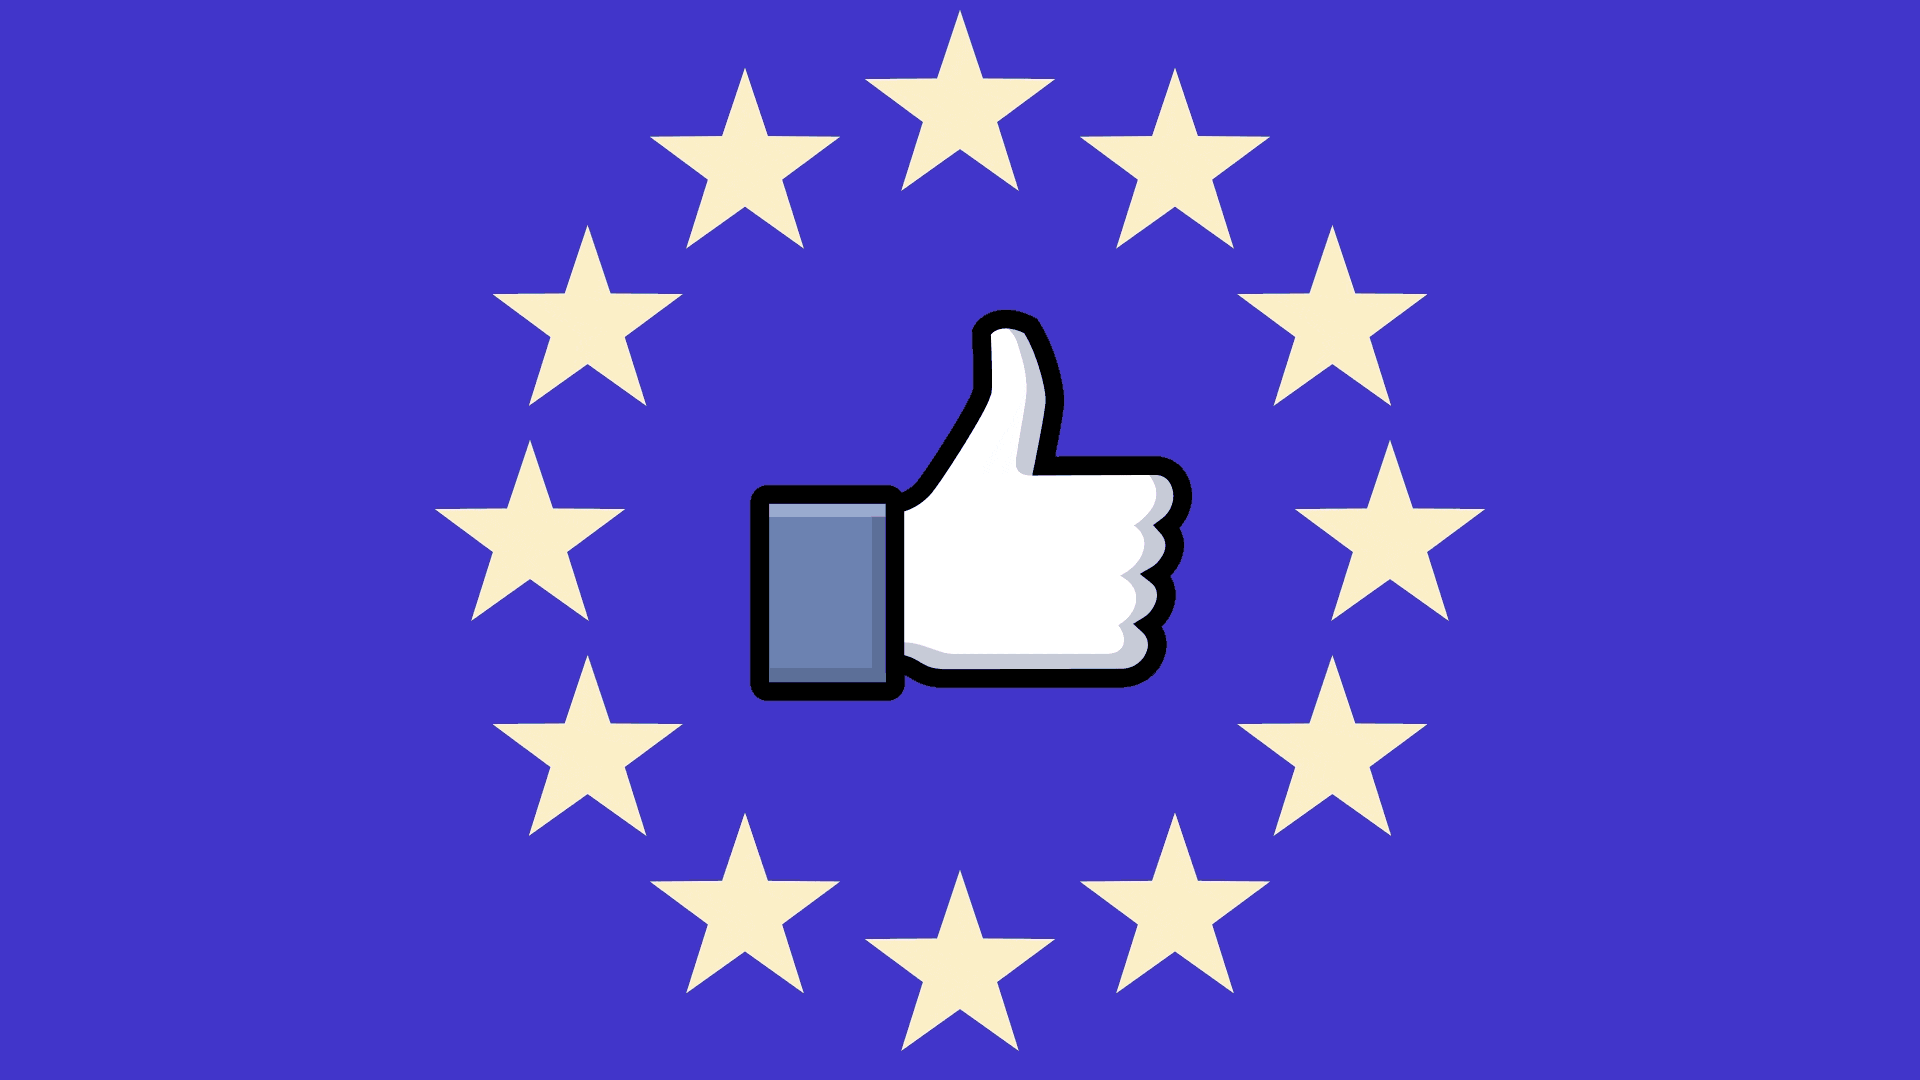 Illustration of EU flag star pattern closing in on a Facebook "like" icon with thumb lifting and falling